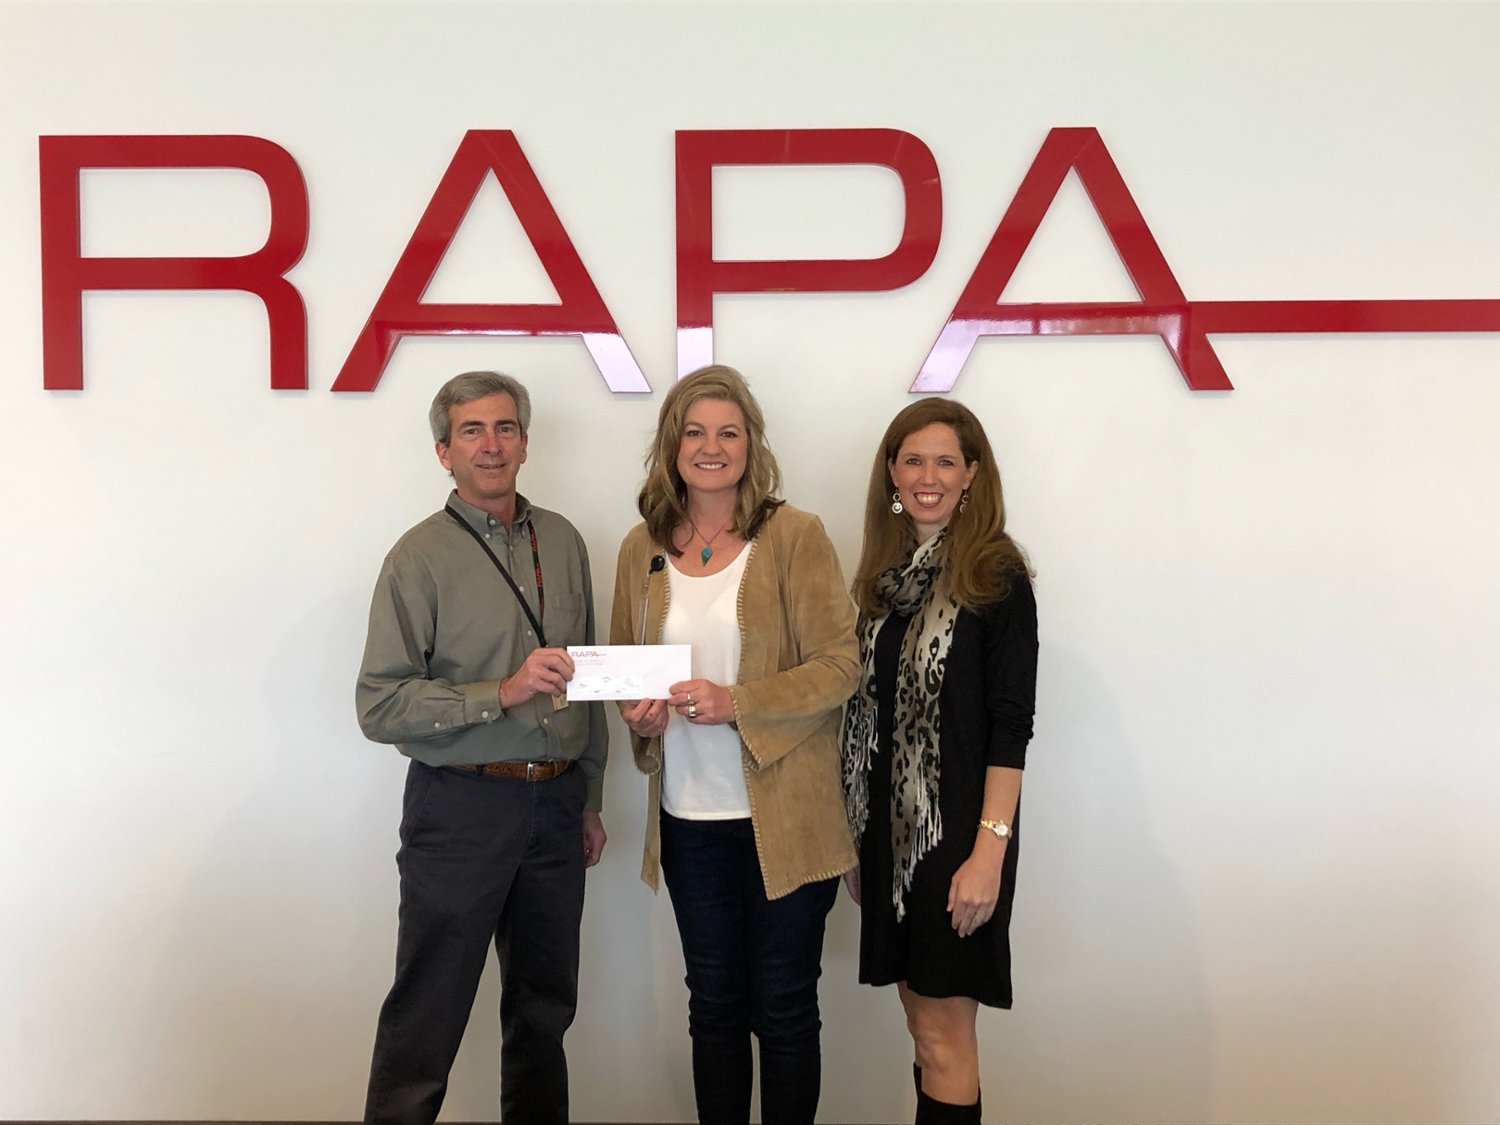  Tim Beasley, human resources manager at RAPA; Mary Lou Ewald, director of outreach at COSAM; and Ashley Underwood, development associate at COSAM. 